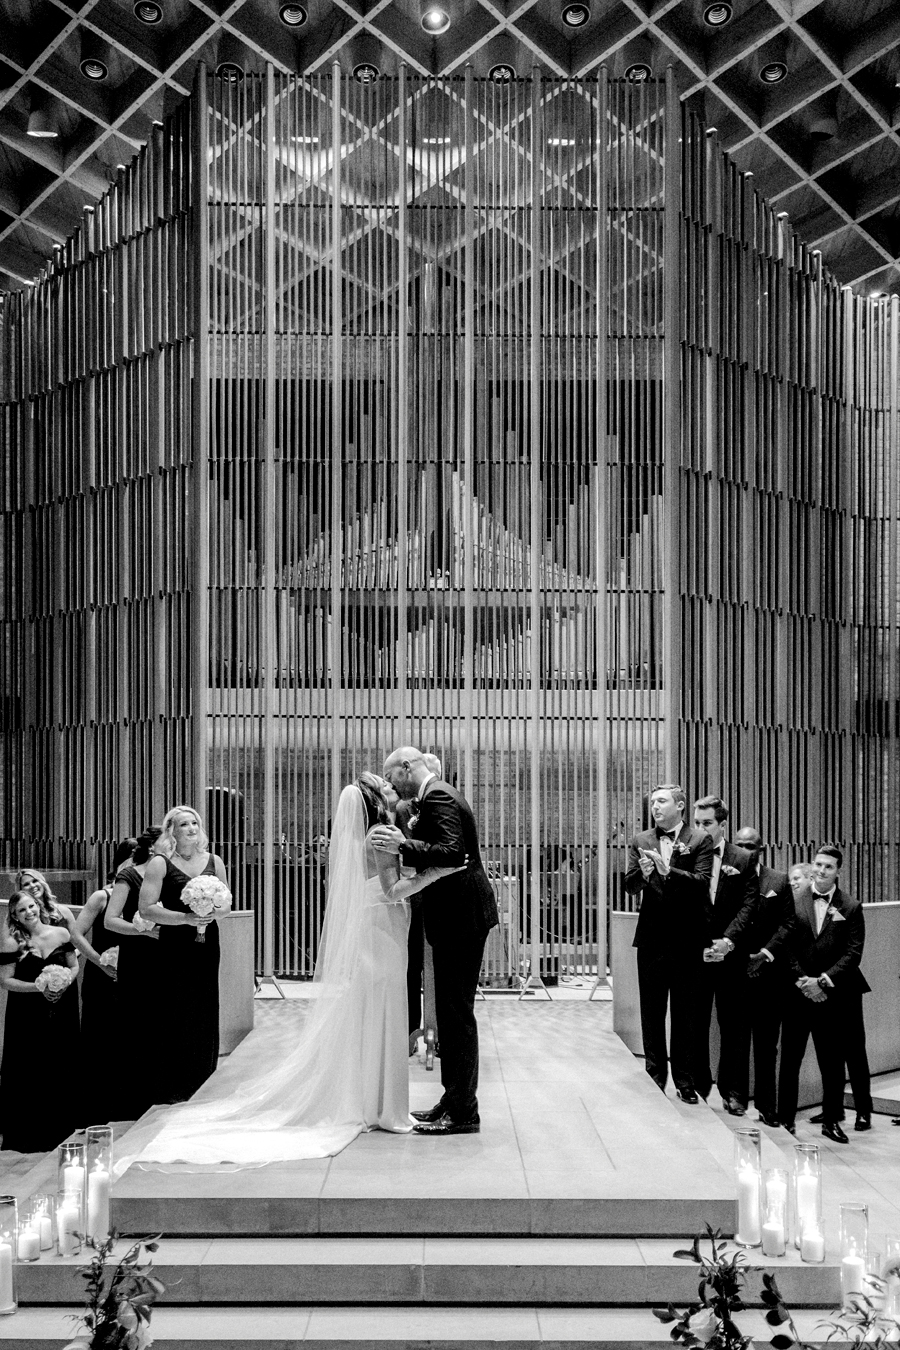 A bride and groom say their vows in Firestone Baars Chapel for their Stephens College wedding photographed by Columbia, Missouri wedding photographer Love Tree Studios.